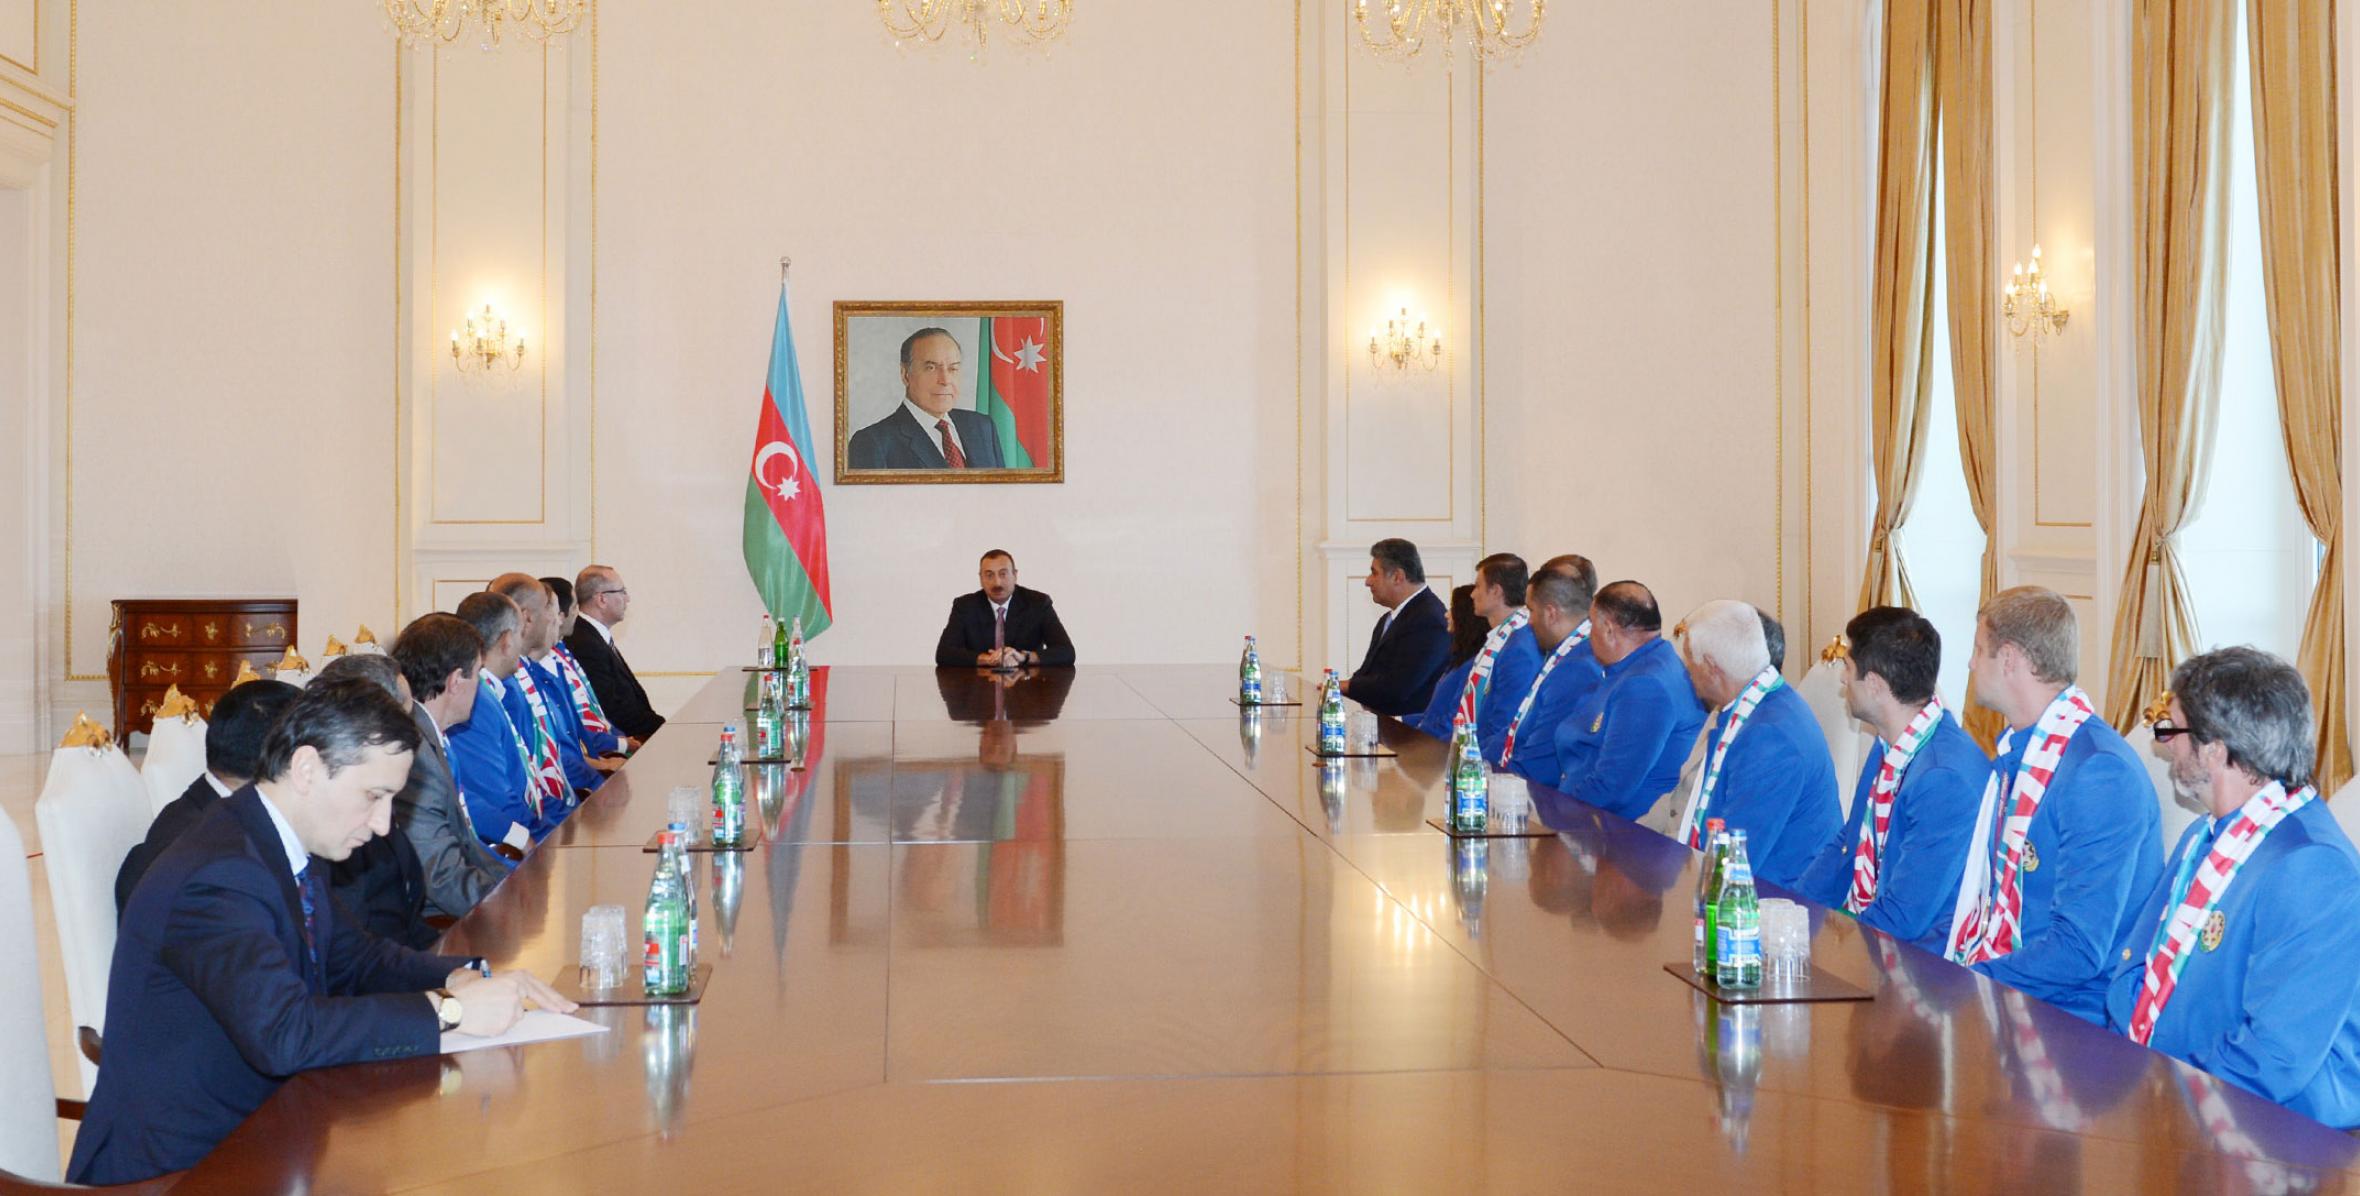 Ilham Aliyev received the sportsmen and coaches who represented Azerbaijan at the 14th Paralympics in London